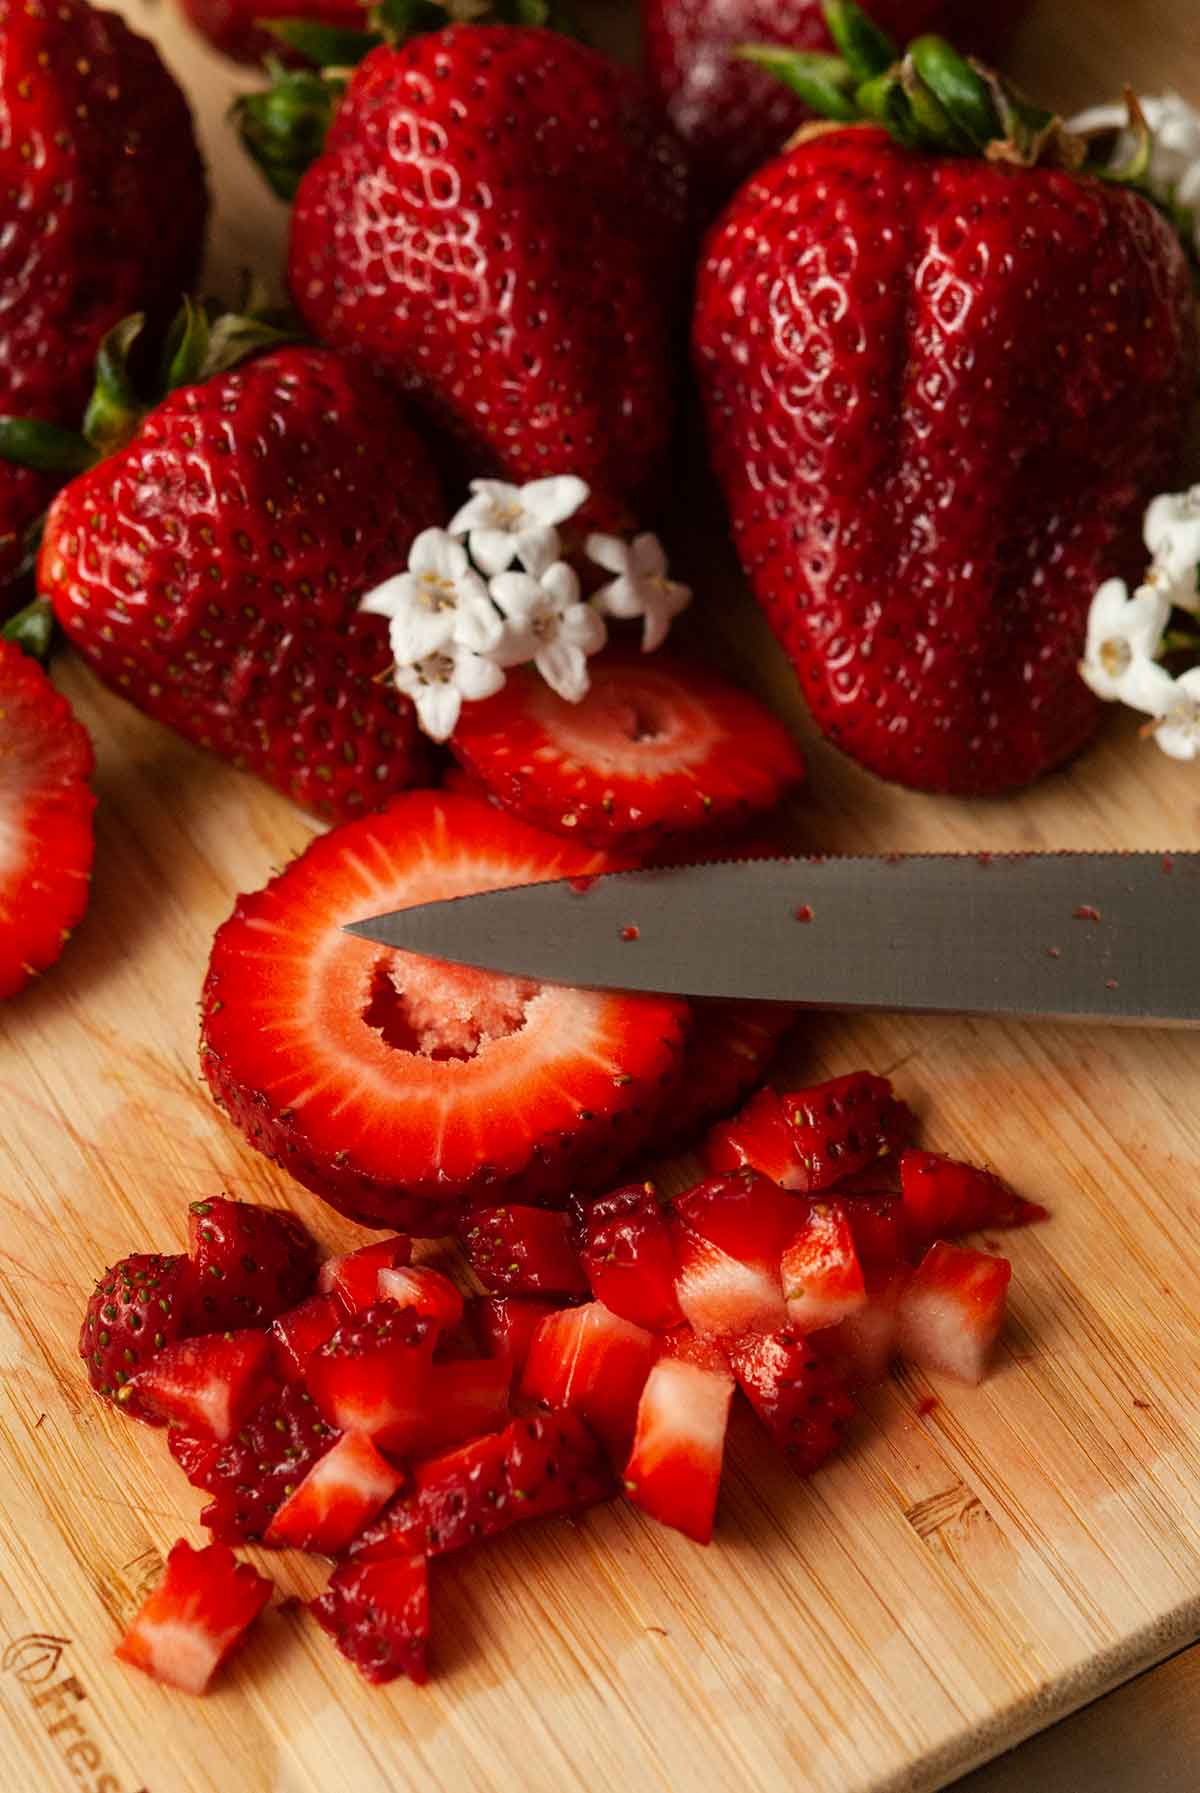 Sliced strawberries on a butting board with other whole strawberries and flowers.